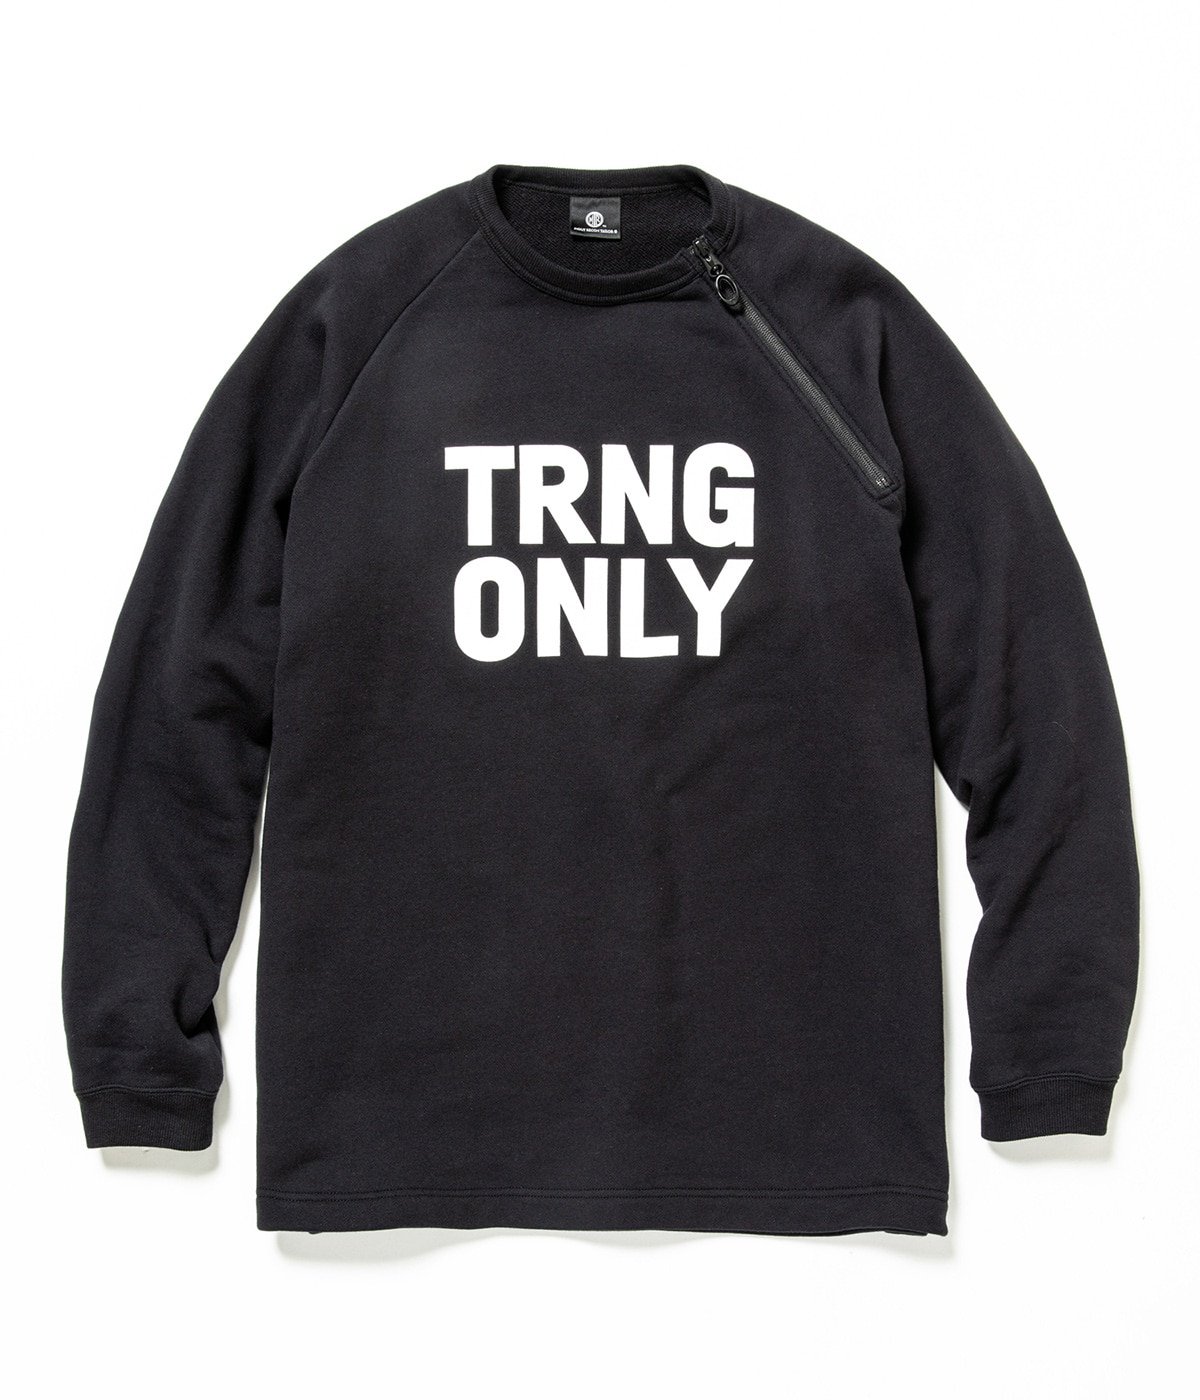 MOUT TRNG Sweat Shirt | MOUT RECON TAILOR(マウトリーコンテーラー) / トップス スウェット